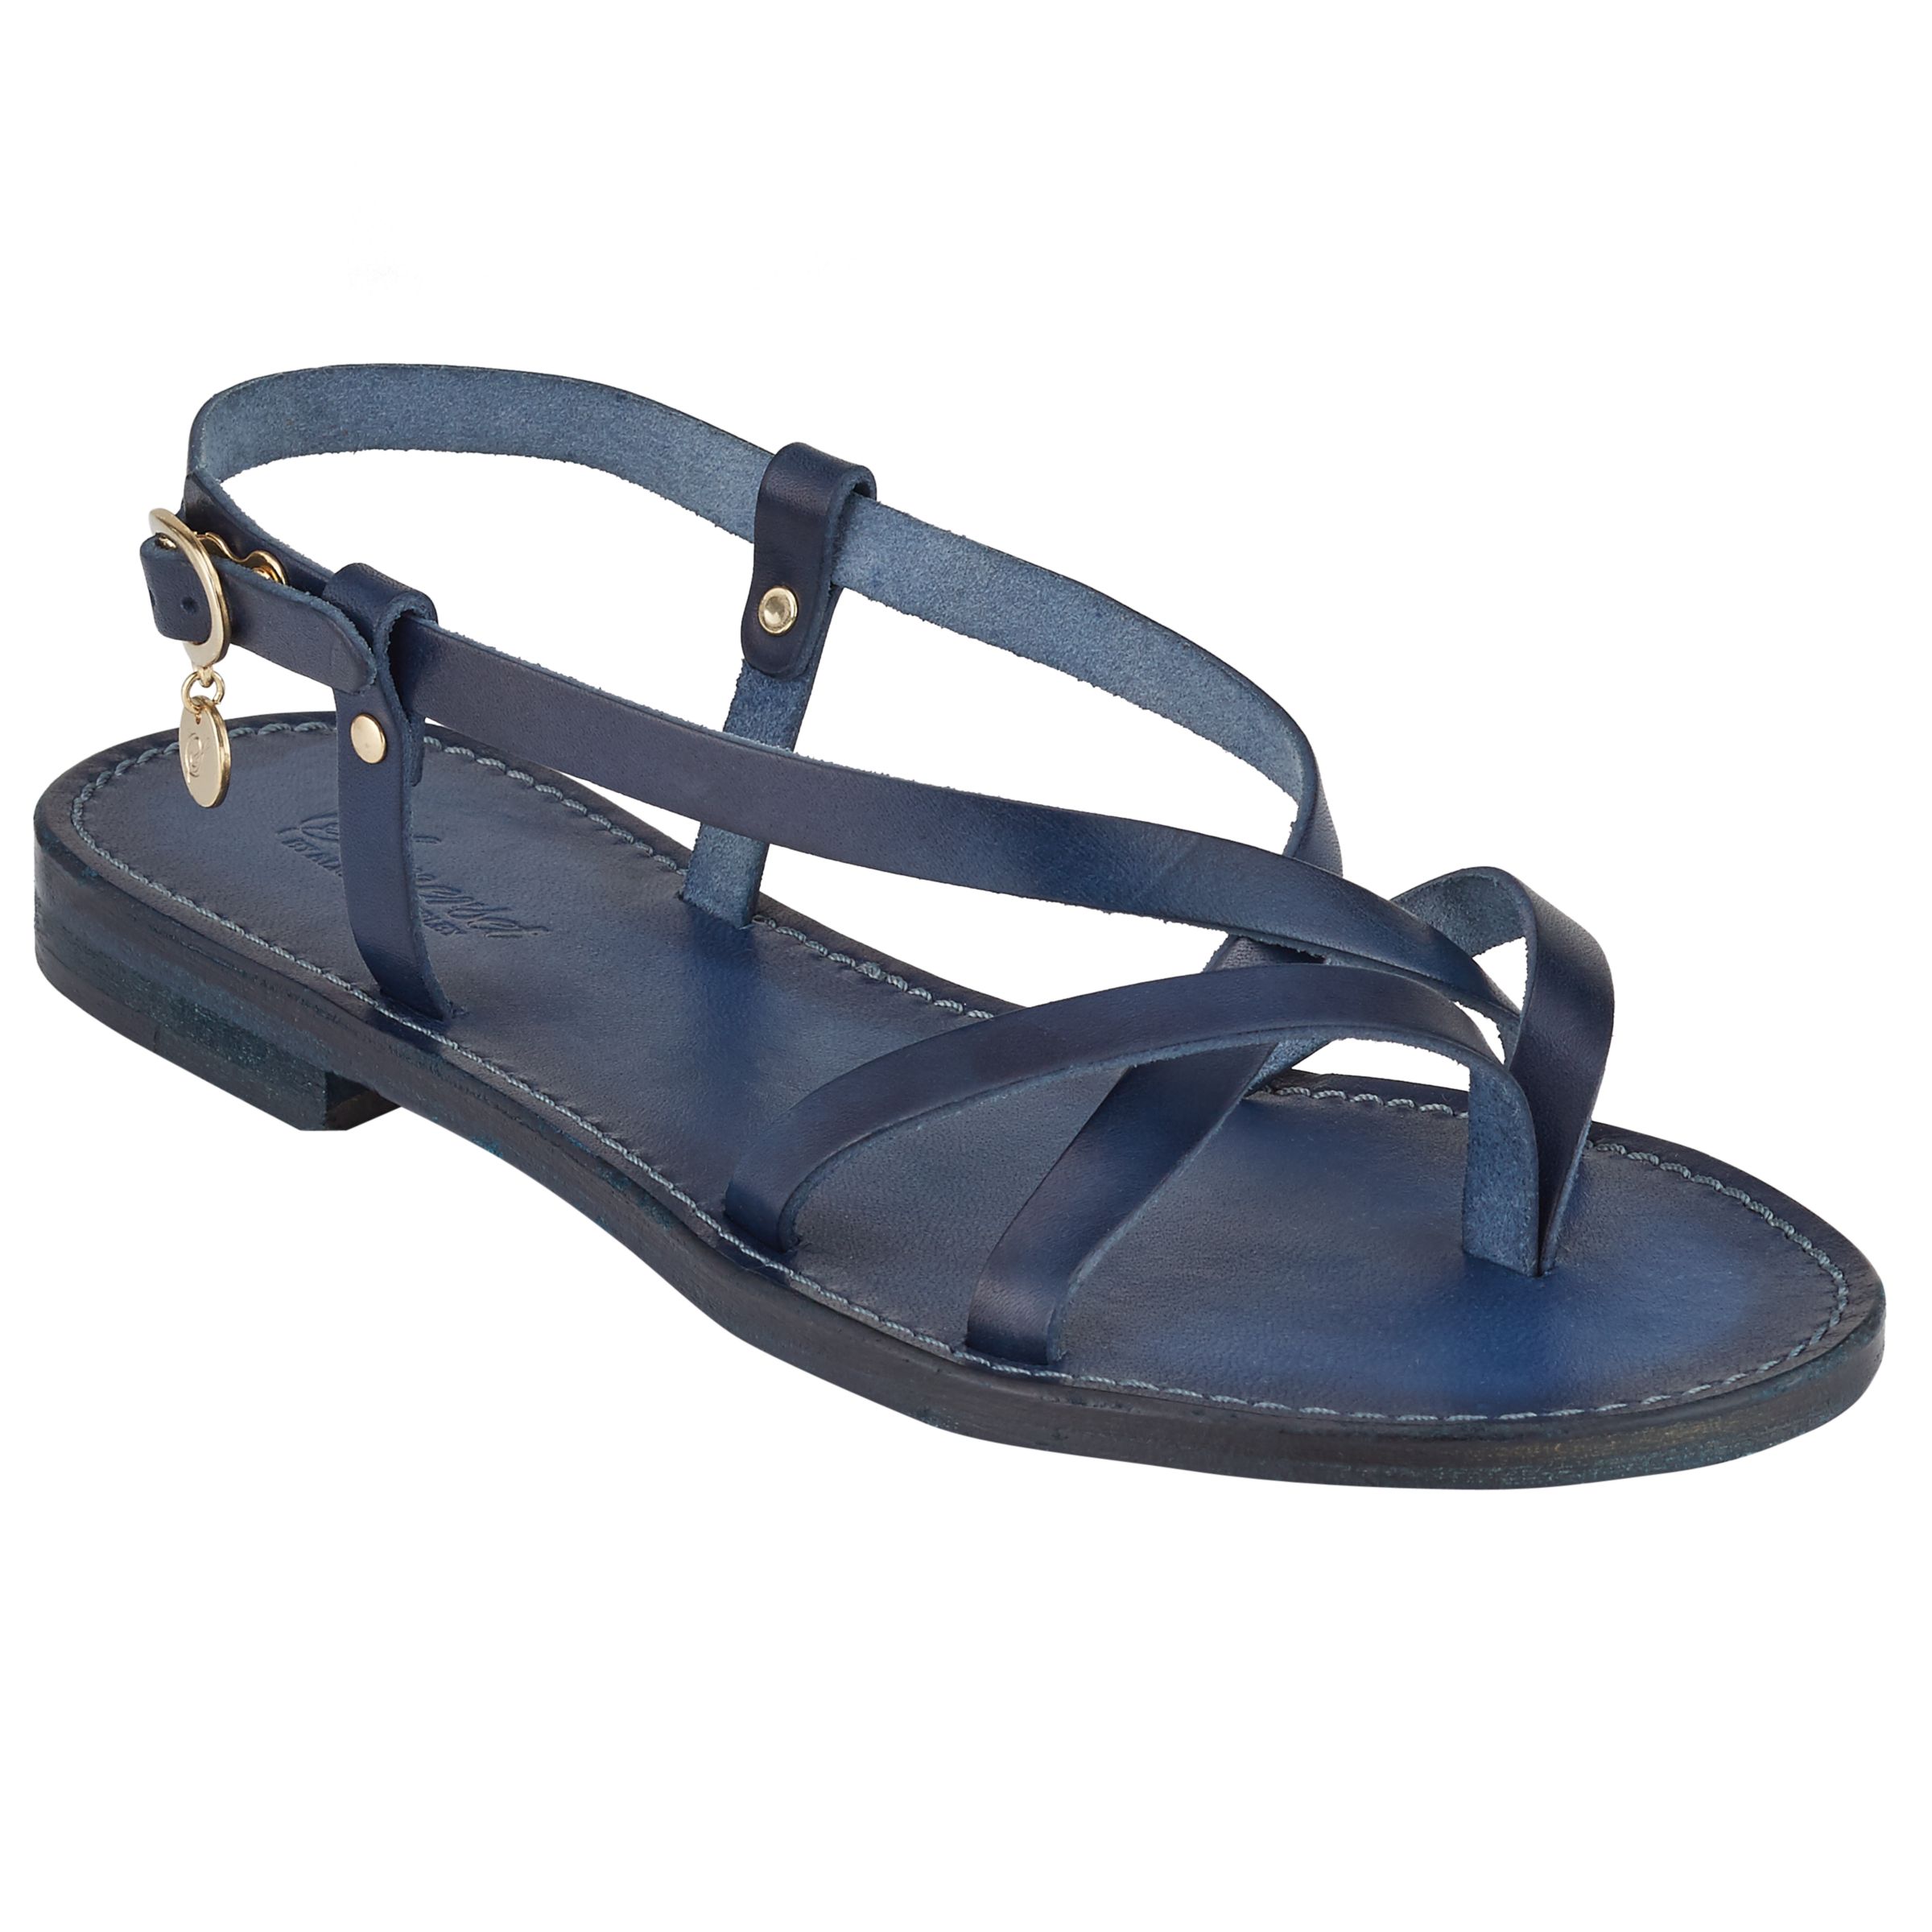 Somerset by Alice Temperley Loxton Sandals, Navy, 7